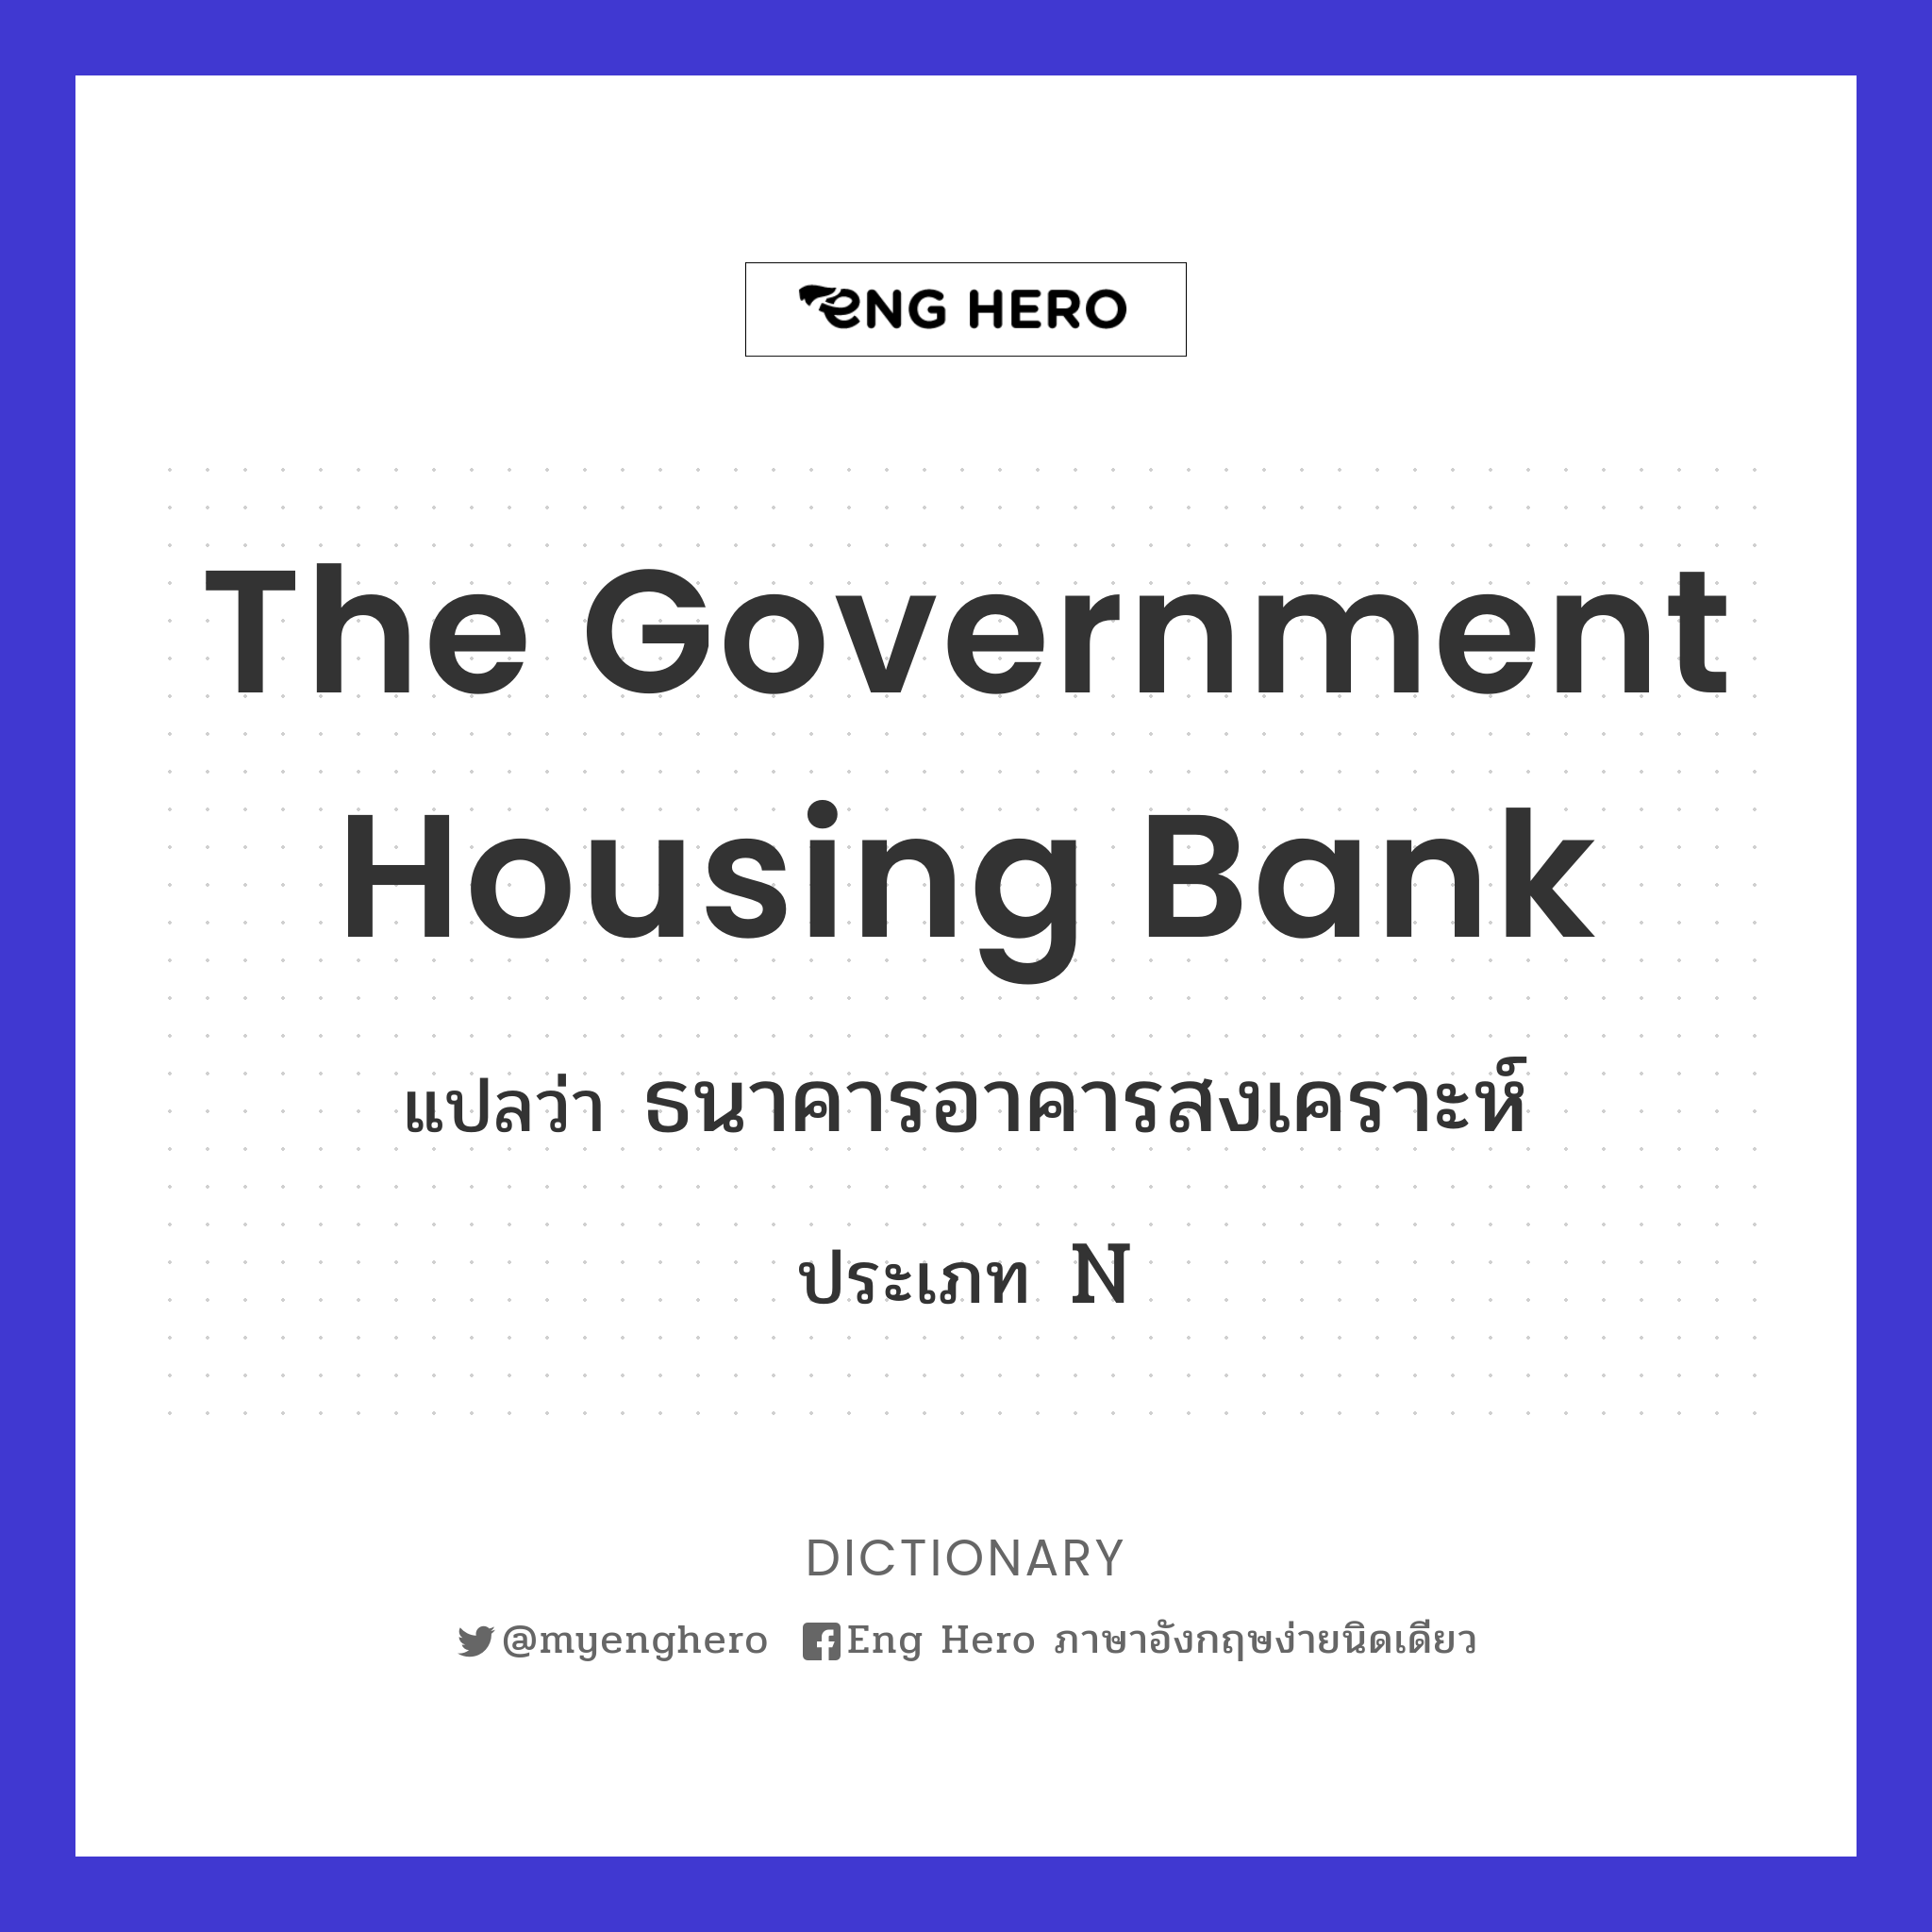 The Government Housing Bank